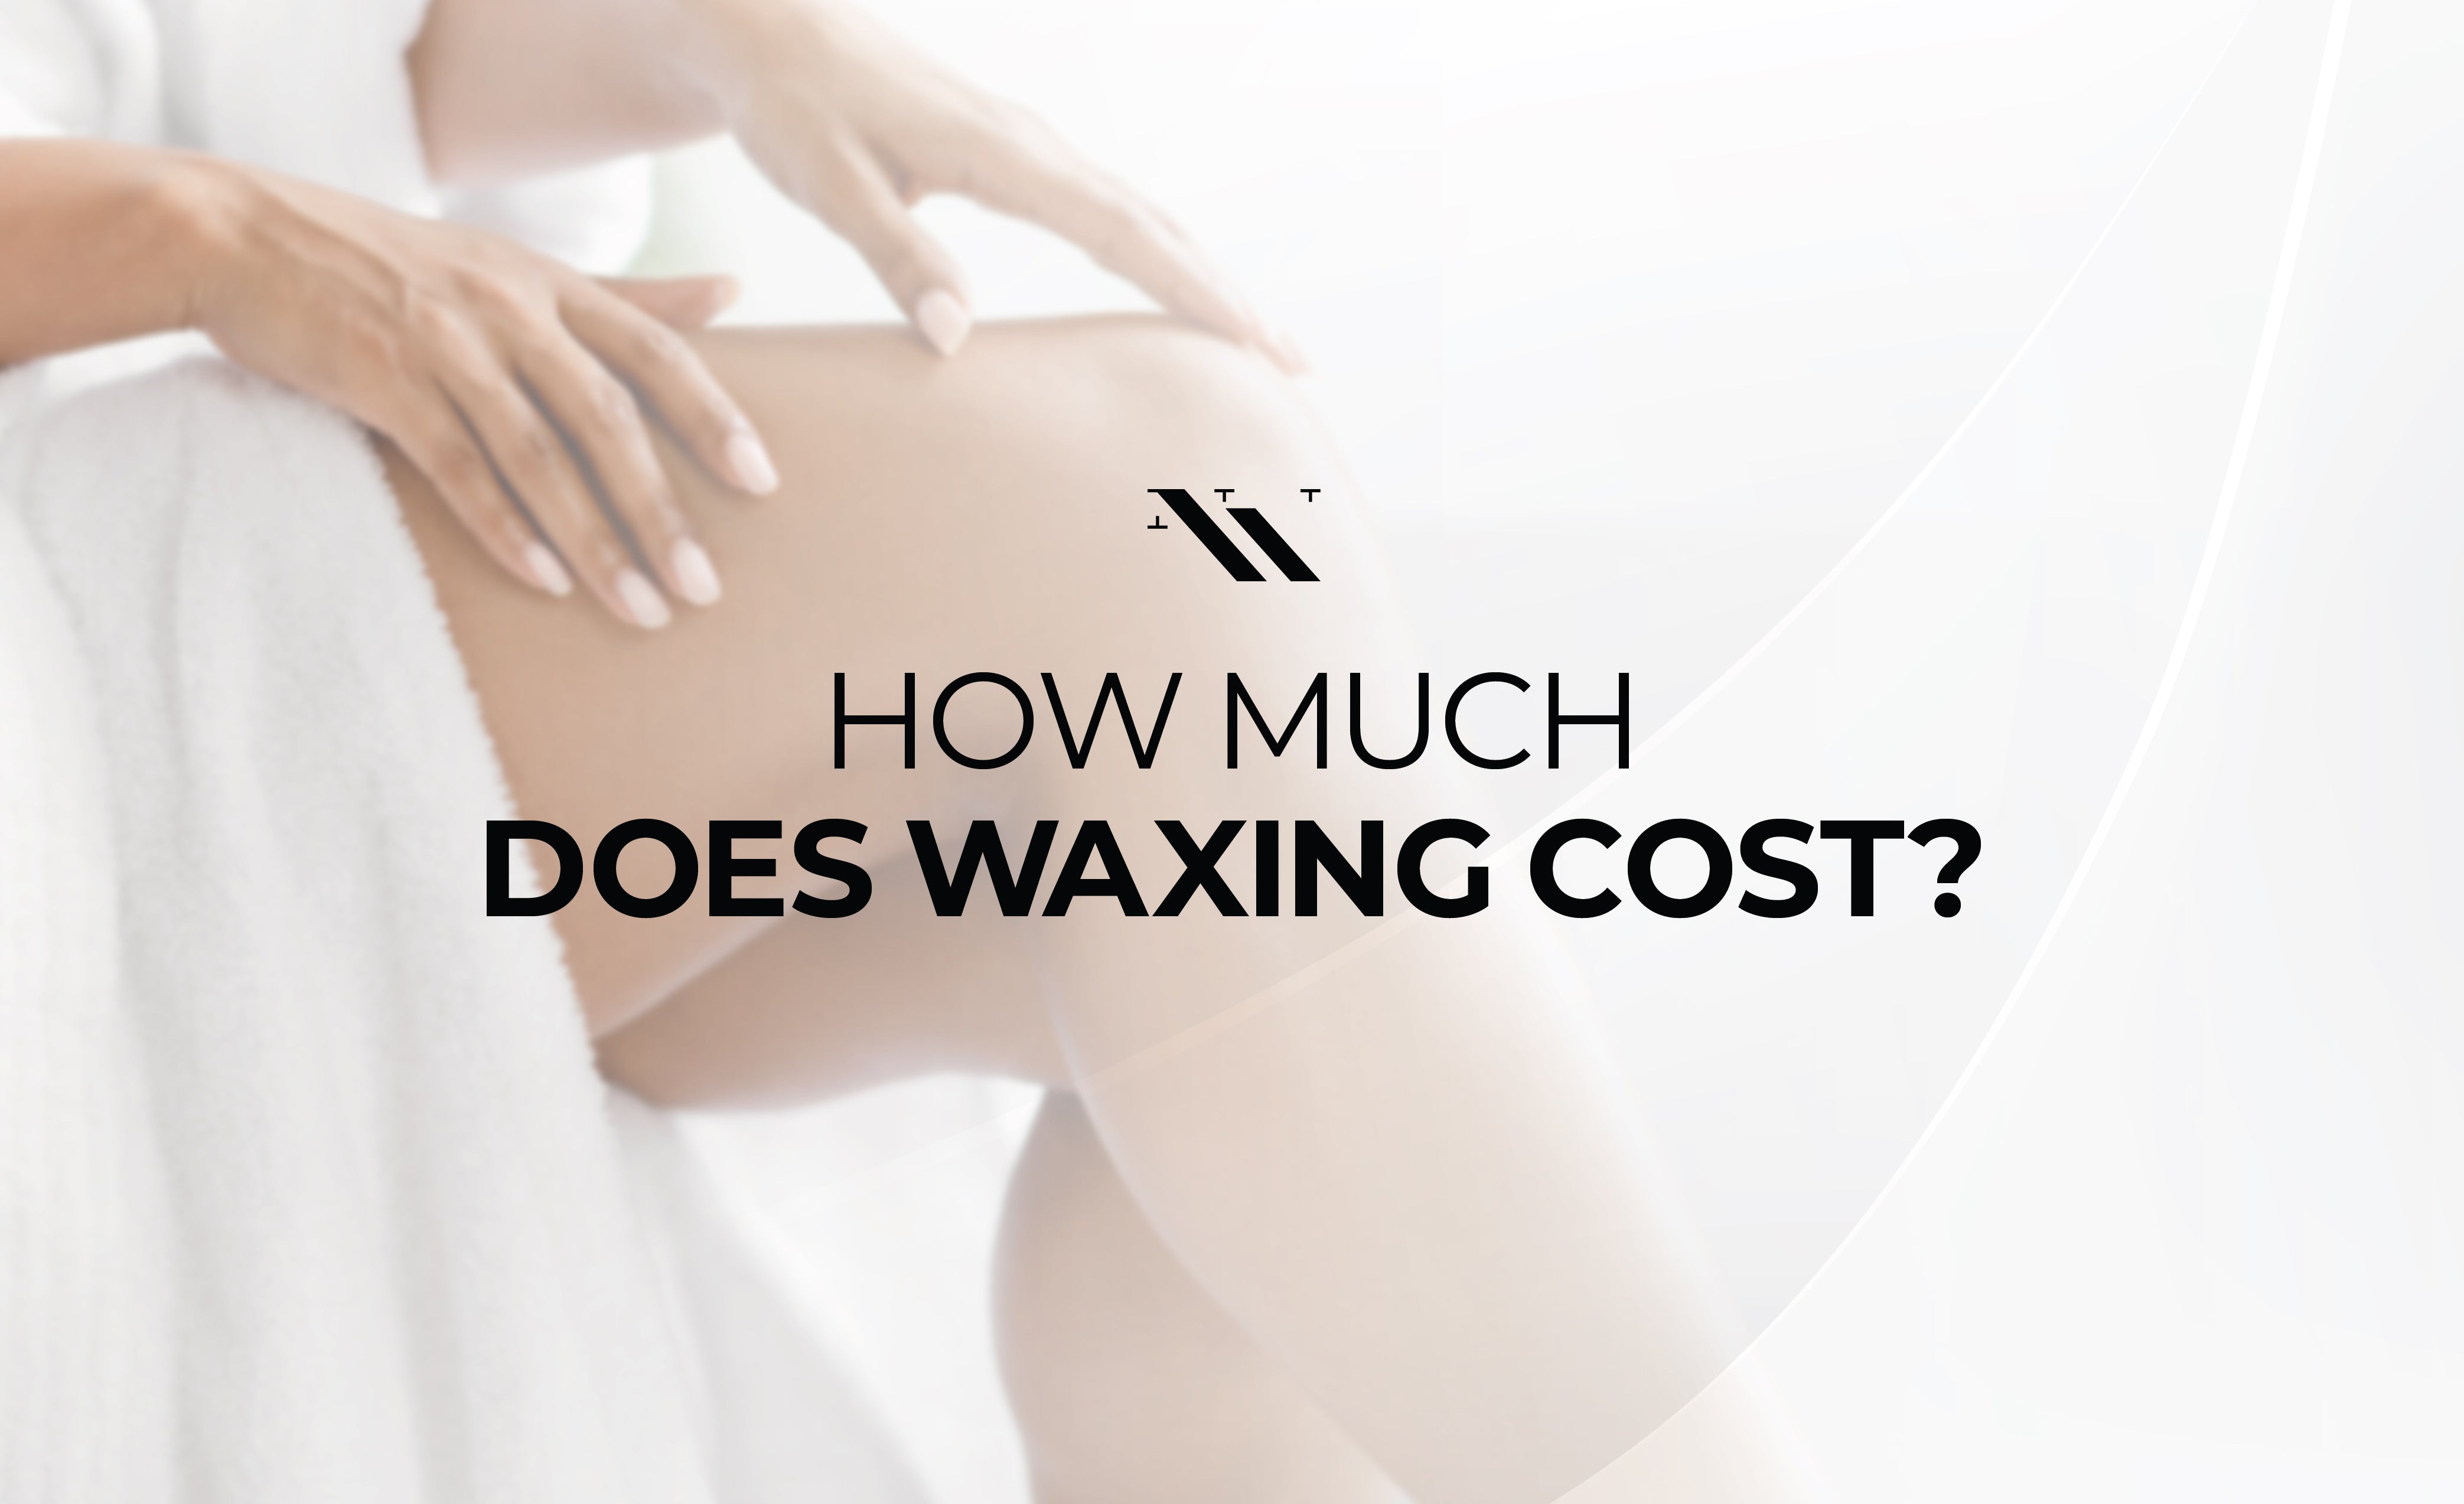 How Much Does Waxing Cost?